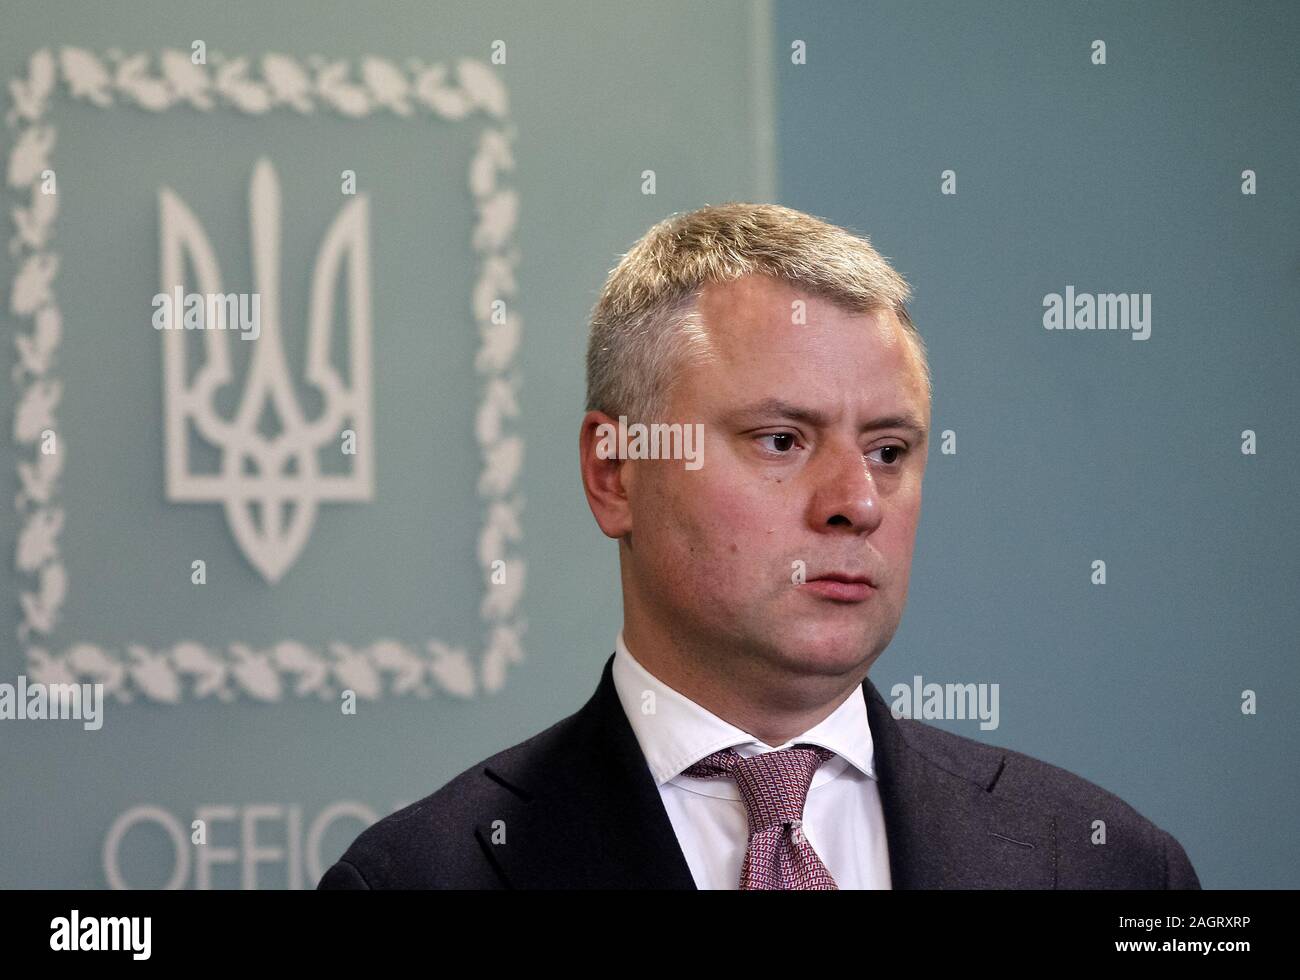 Kiev, Ukraine. 21st Dec, 2019. The Naftogaz of Ukraine Executive Director YURIY VITRENKO attends a briefing with Ukrainian Minister of energy and environmental erotection OLEKSIY ORZHEL (not seen) in Kiev, Ukraine, on 21 December 2019. As media reported, the EU, Ukraine and Russia reached a final agreement about Russian gas transit via Ukraine to Europe. Credit: Serg Glovny/ZUMA Wire/Alamy Live News Stock Photo